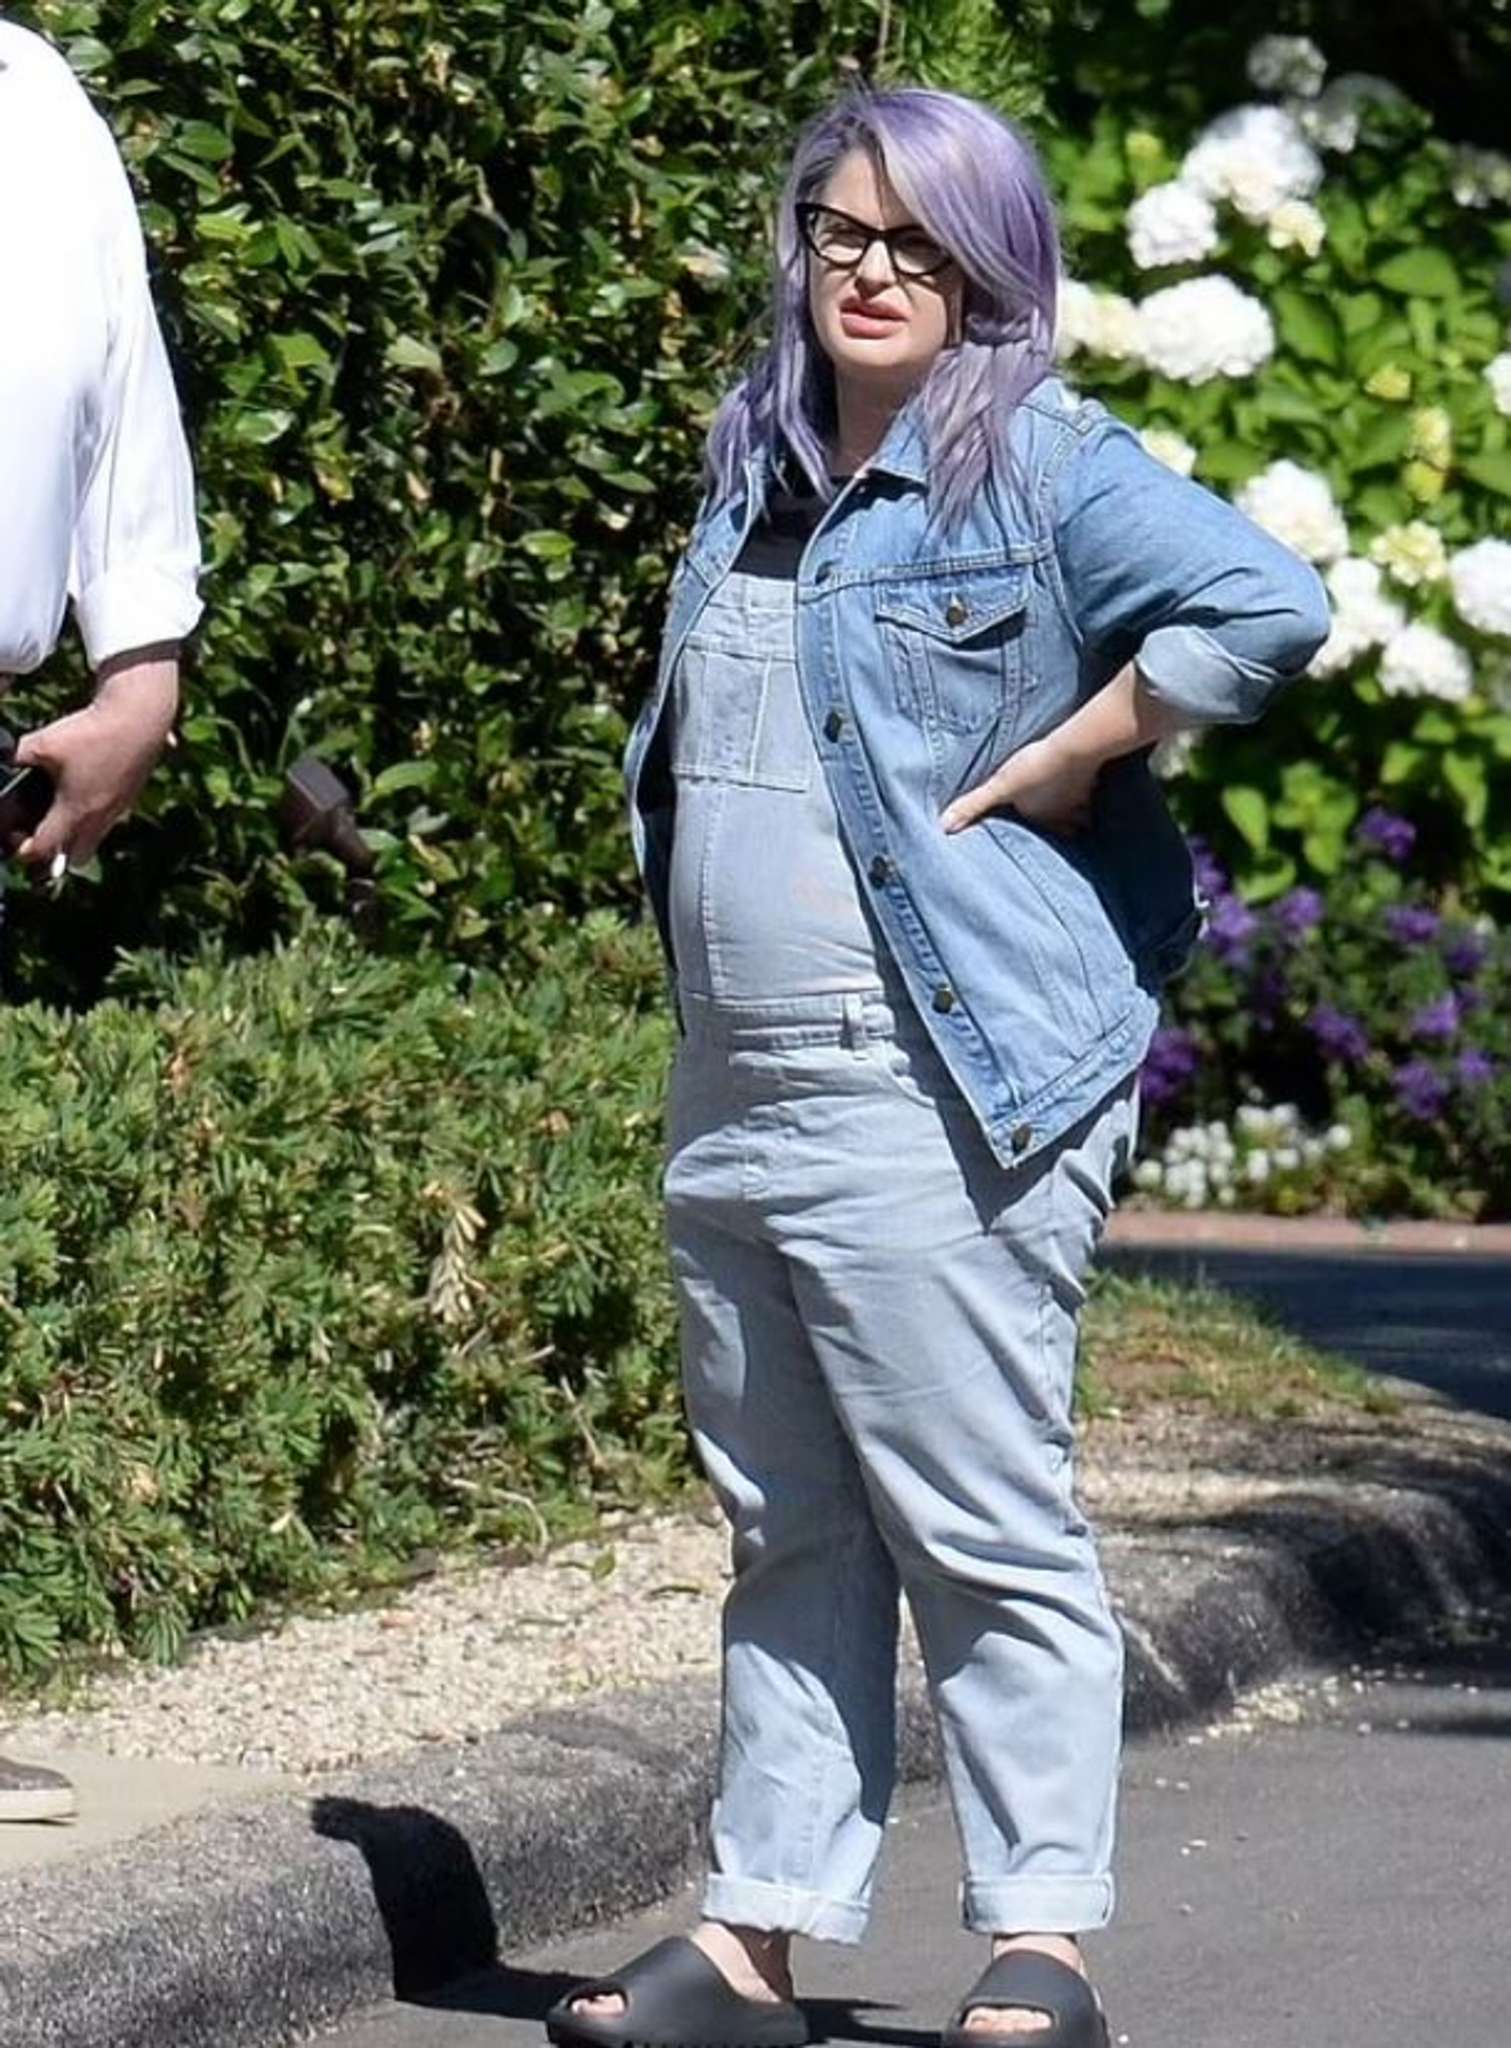 The first photos ofpregnant Kelly Osbourne appeared on the network